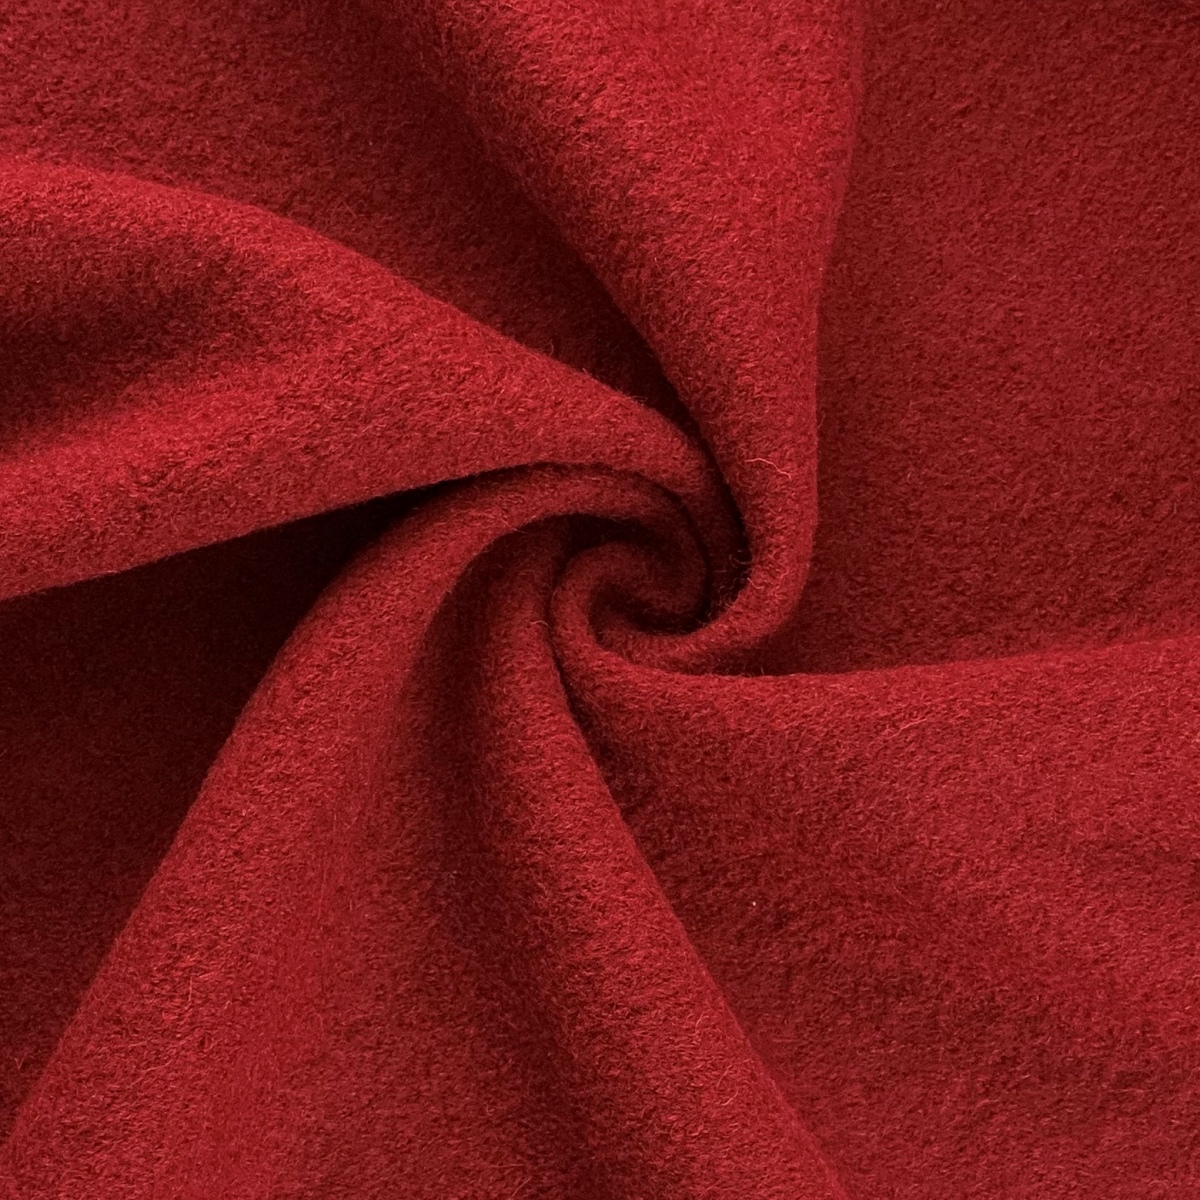 Pure Luxury 100% Boiled Wool Jacket and Coat Fabric - Red